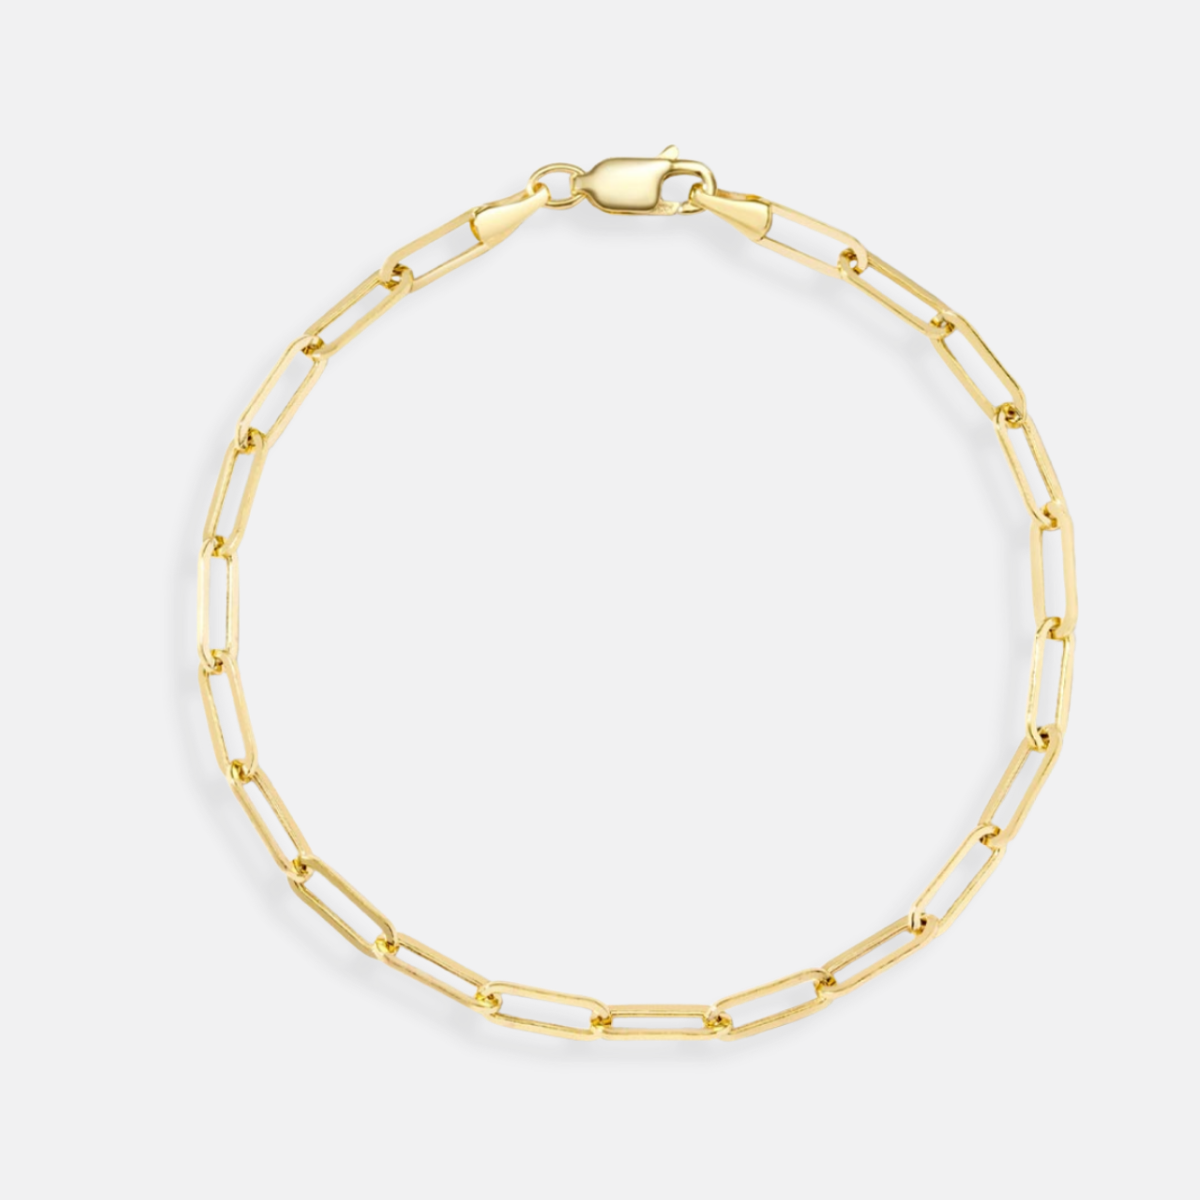 paperclip chain bracelet - heavy weight